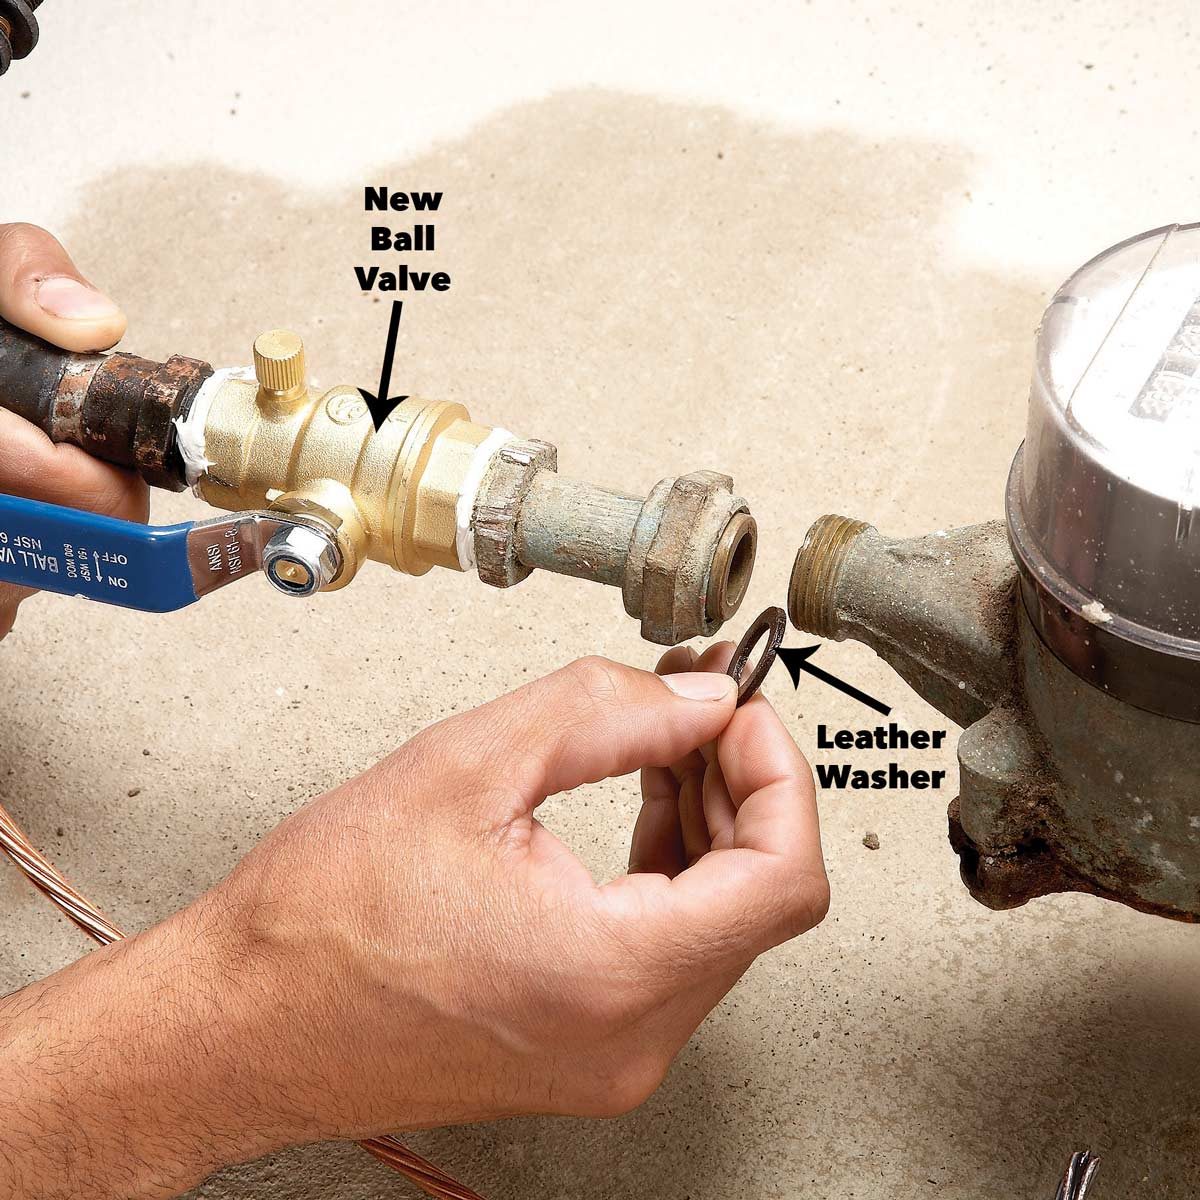 Home Repair: How to Replace the Main Shut Off Valve | The Family Handyman